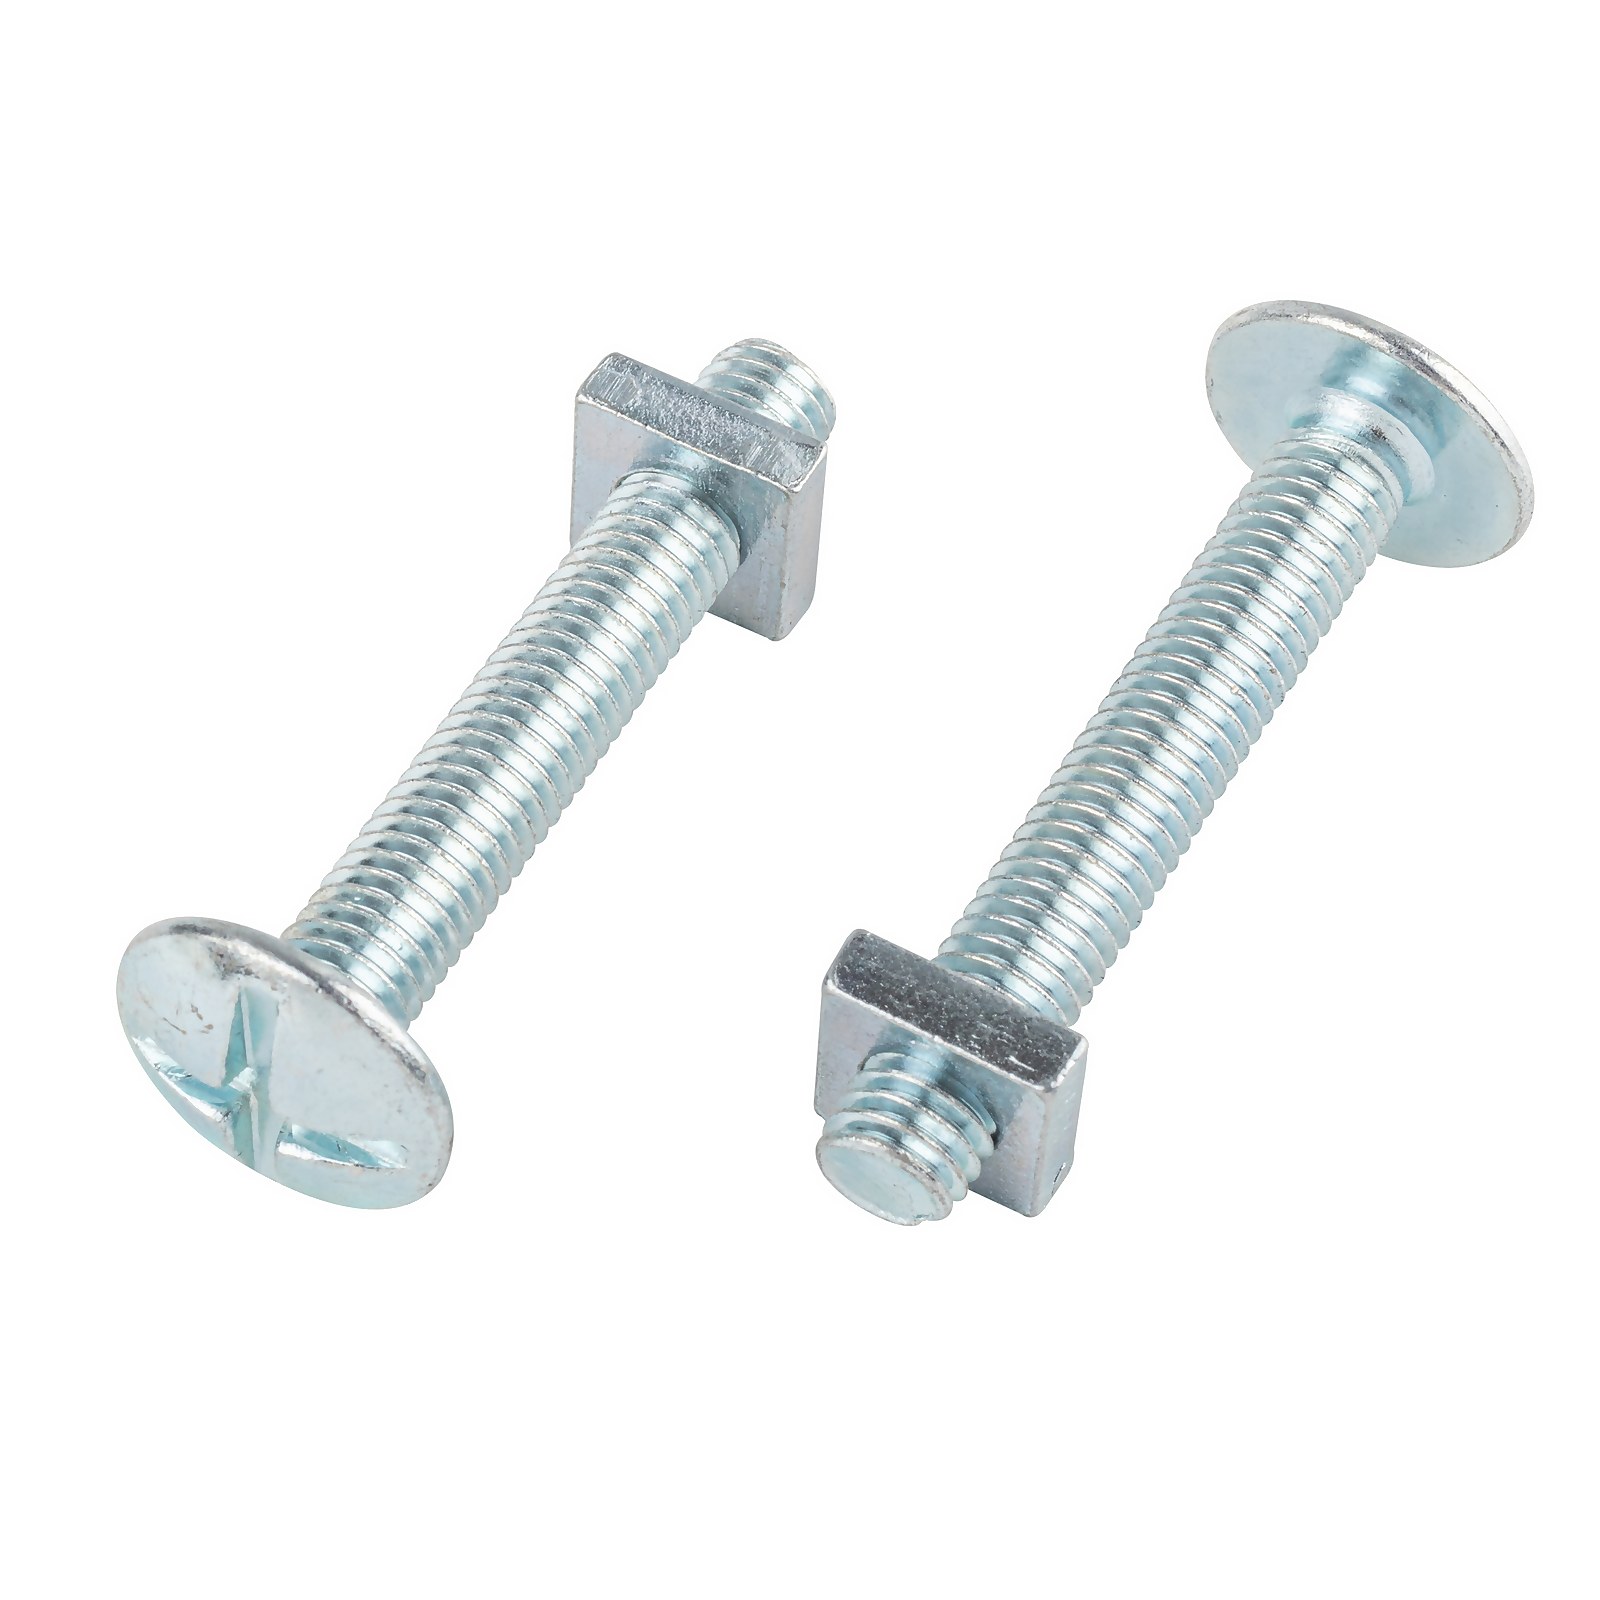 Photo of Homebase Zinc Plated Roof Bolt M8 50mm 10 Pack